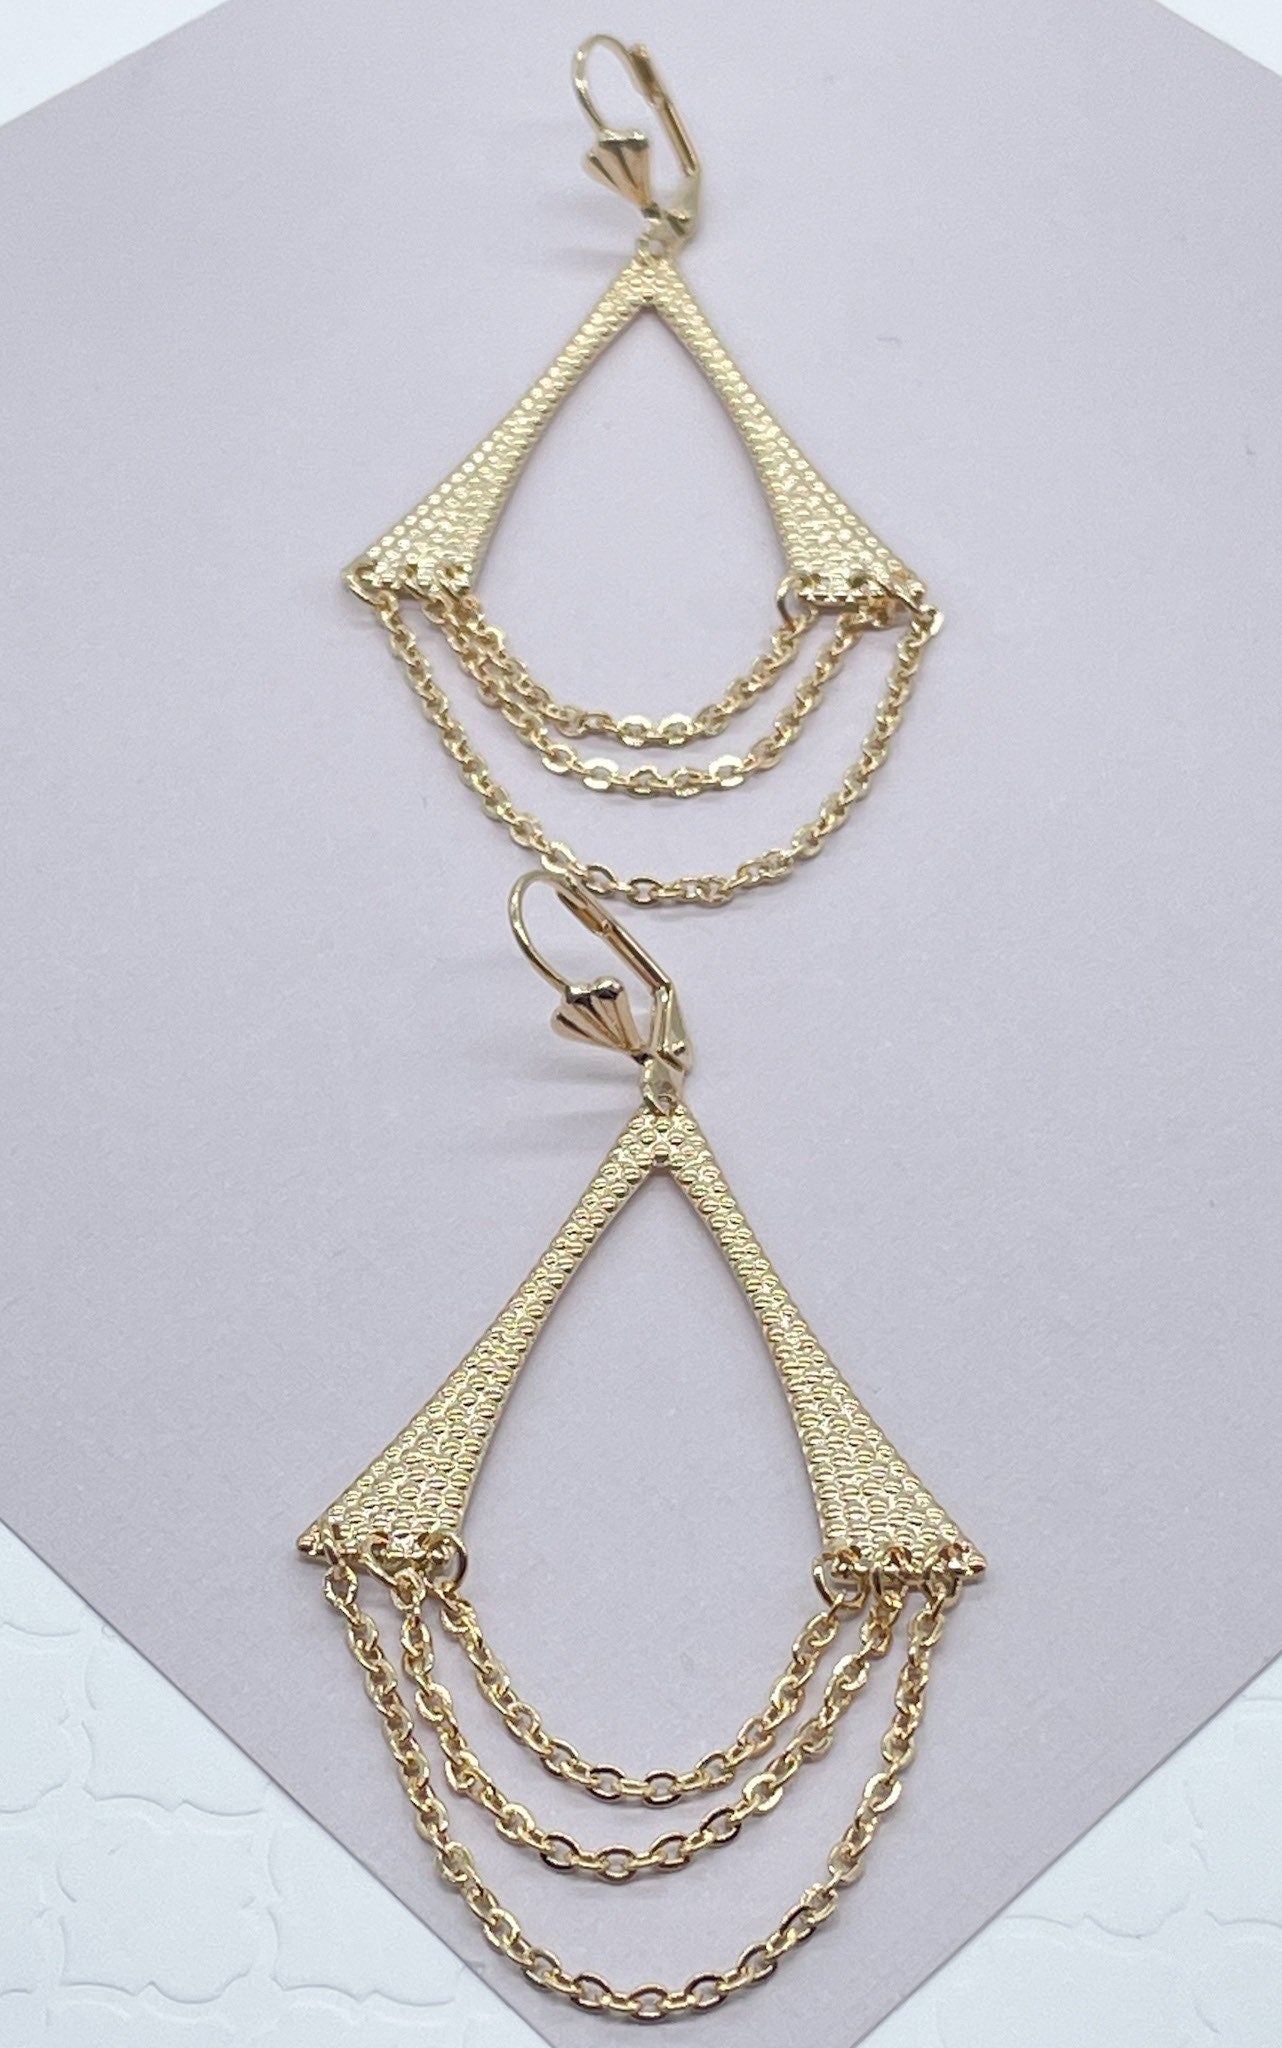 18k Gold Layered Light Chandelier Dangling Earrings Featuring 3 Cable Chain And